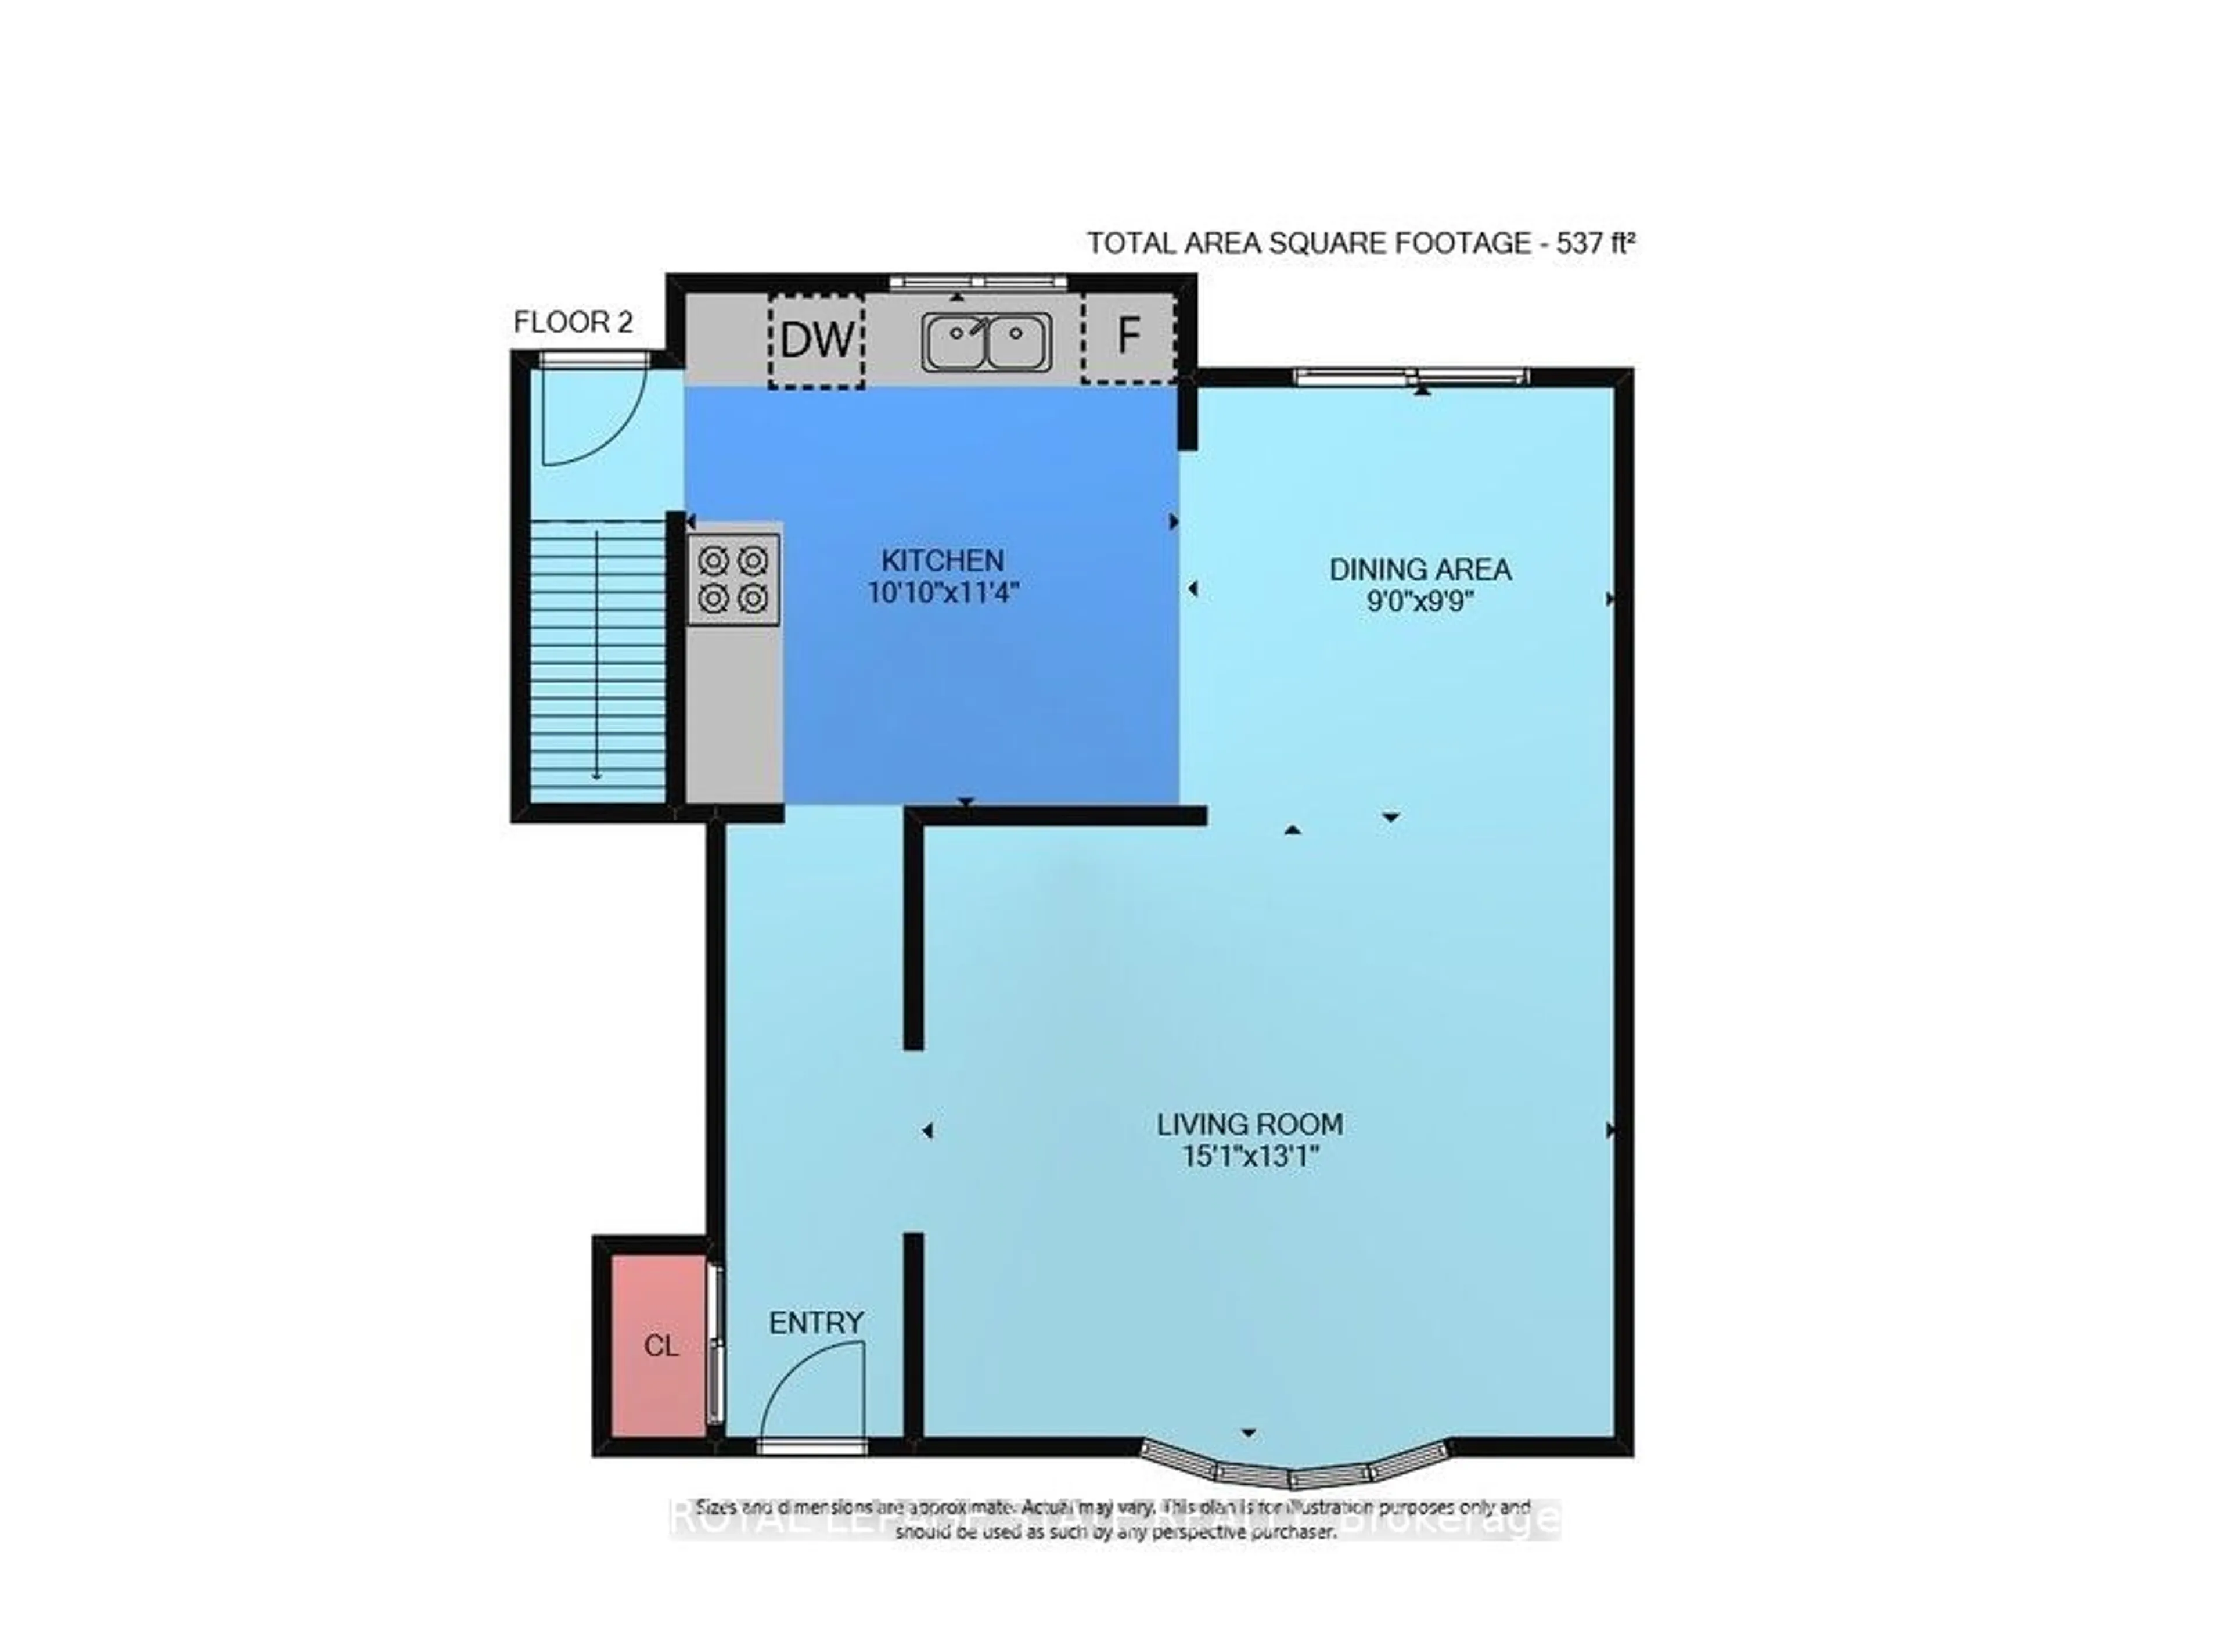 Floor plan for 26 Leawood Dr, Grimsby Ontario L3M 4E2